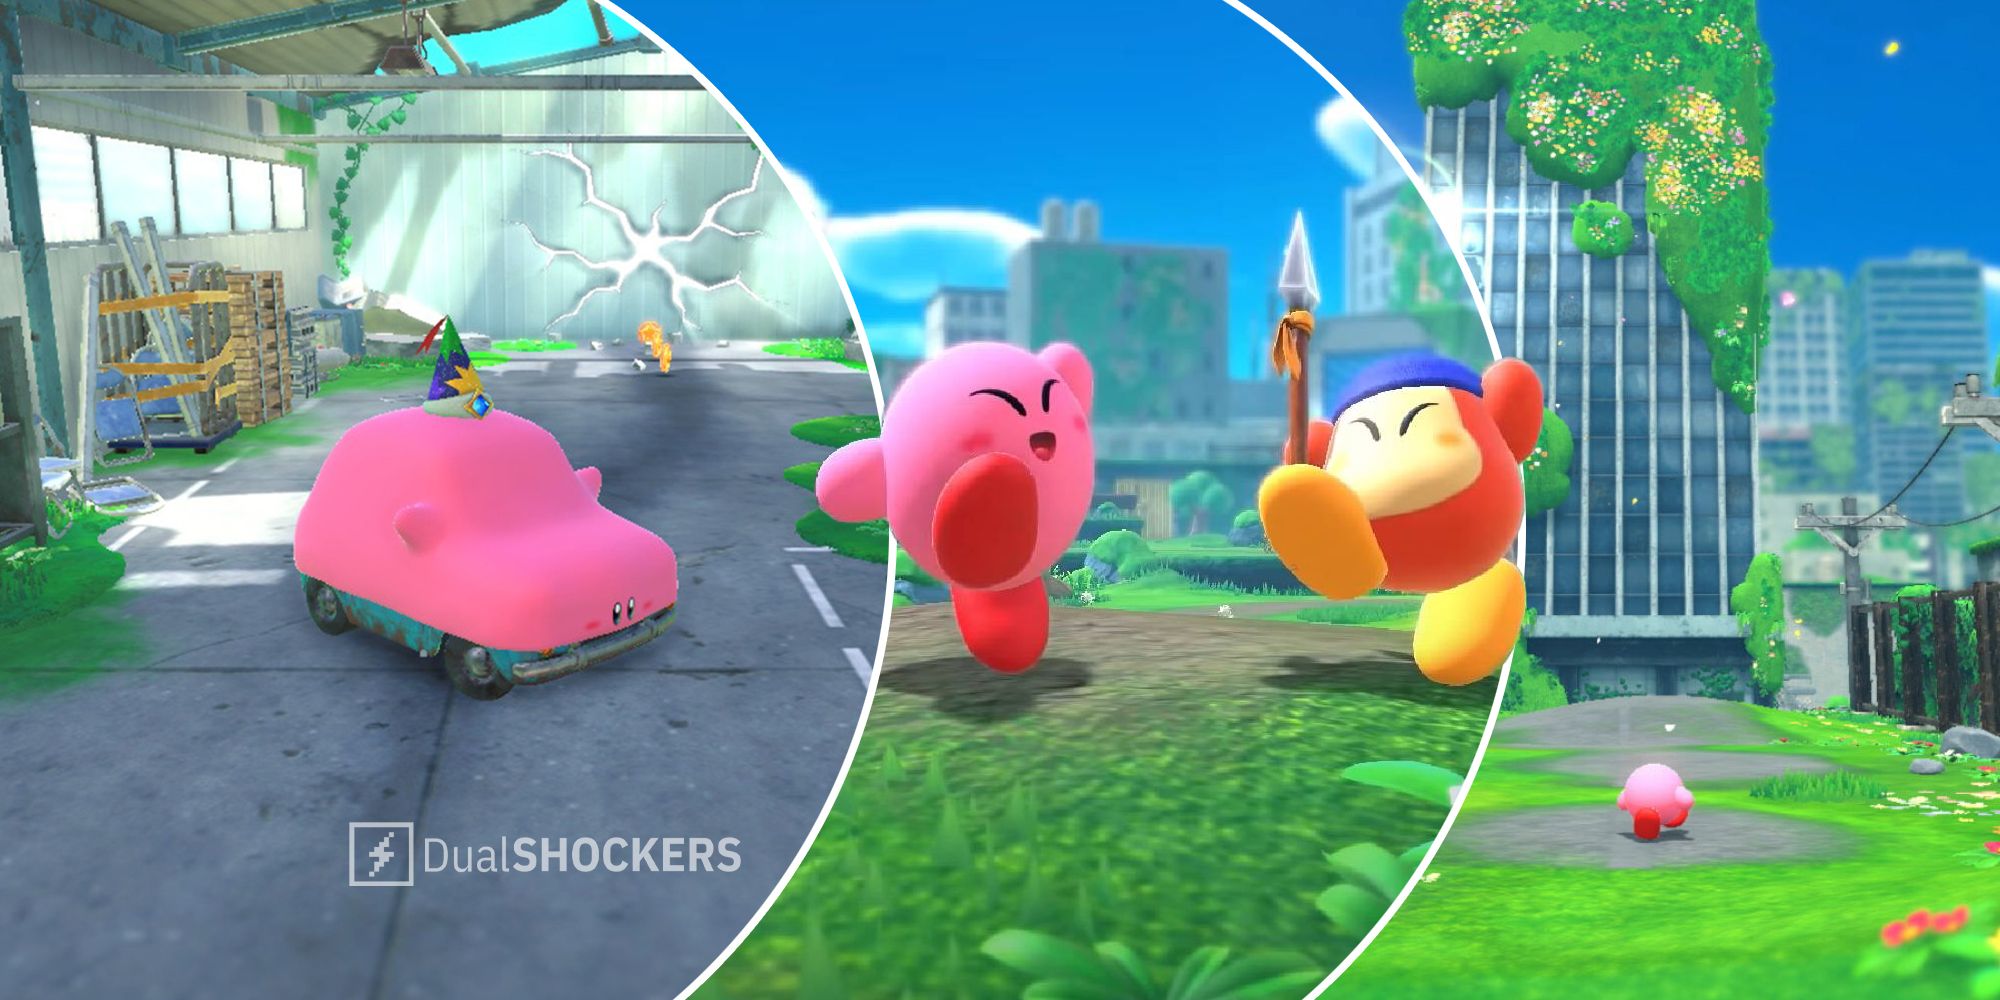 Kirby And The Forgotten Land car Kirby, Kirby and Waddle Dee, Kirby walking through overgrown city